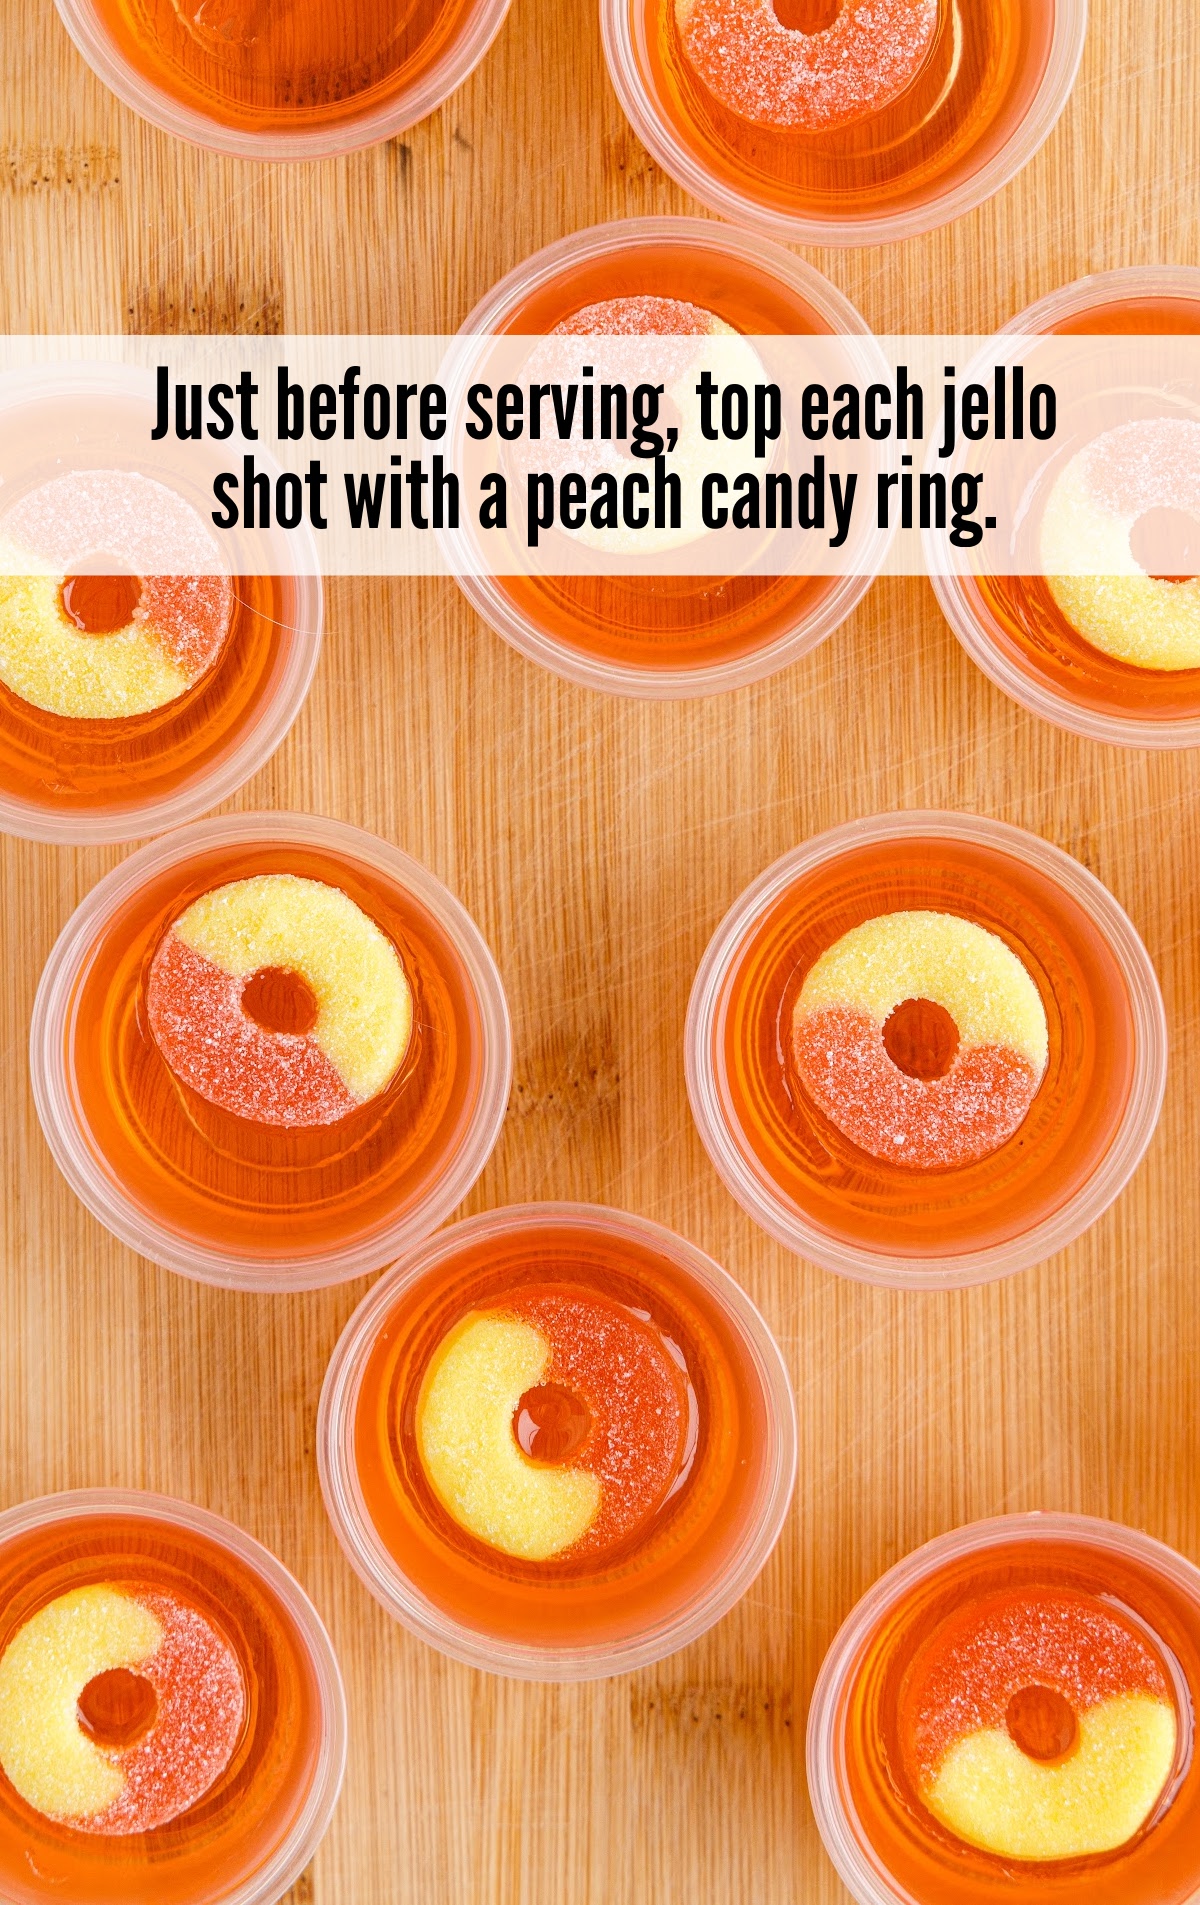 A wooden table topped with plates of food on a plate, with Peach and Jello shot